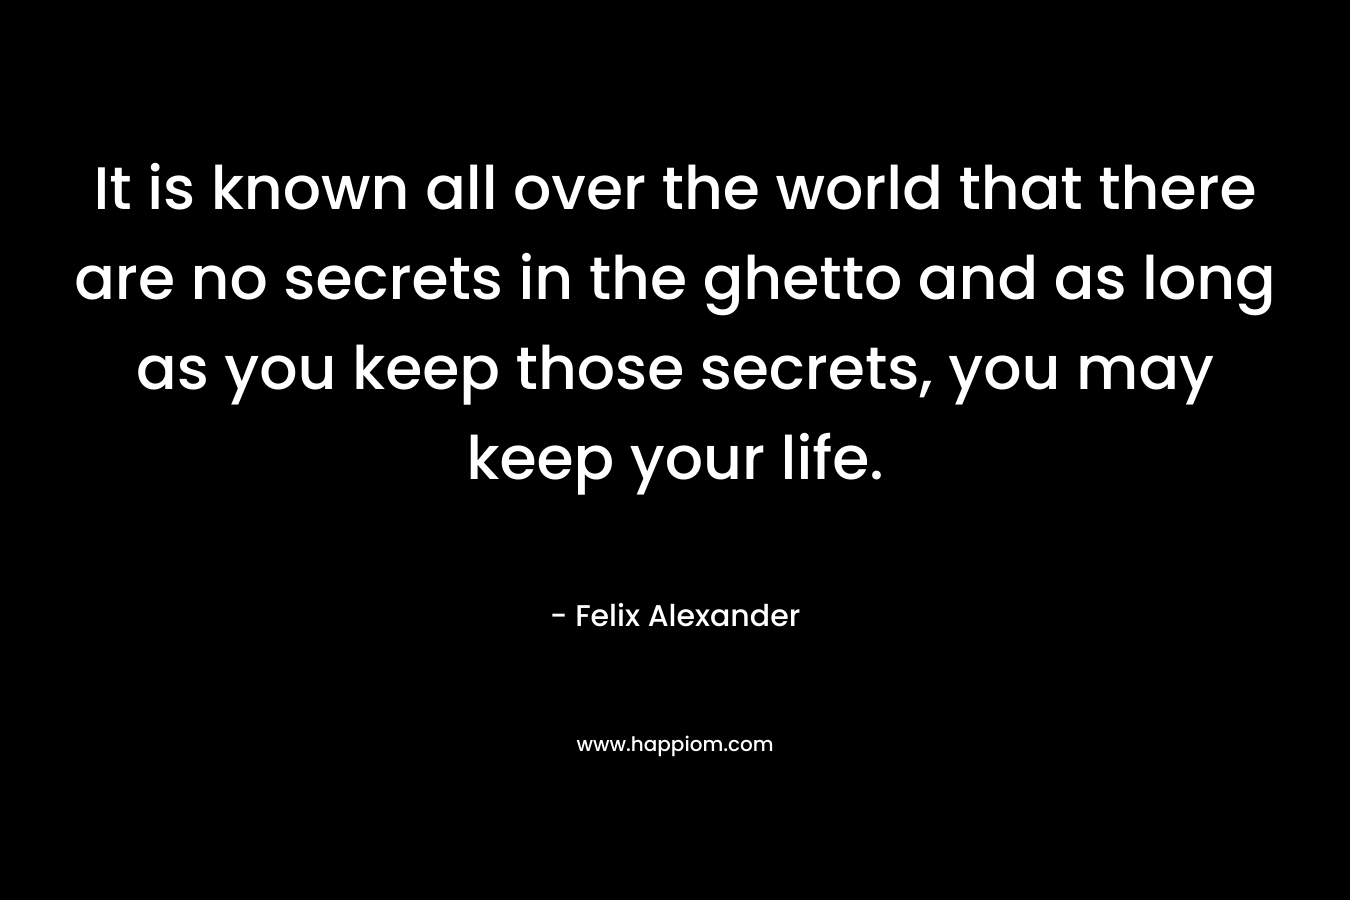 It is known all over the world that there are no secrets in the ghetto and as long as you keep those secrets, you may keep your life. – Felix Alexander